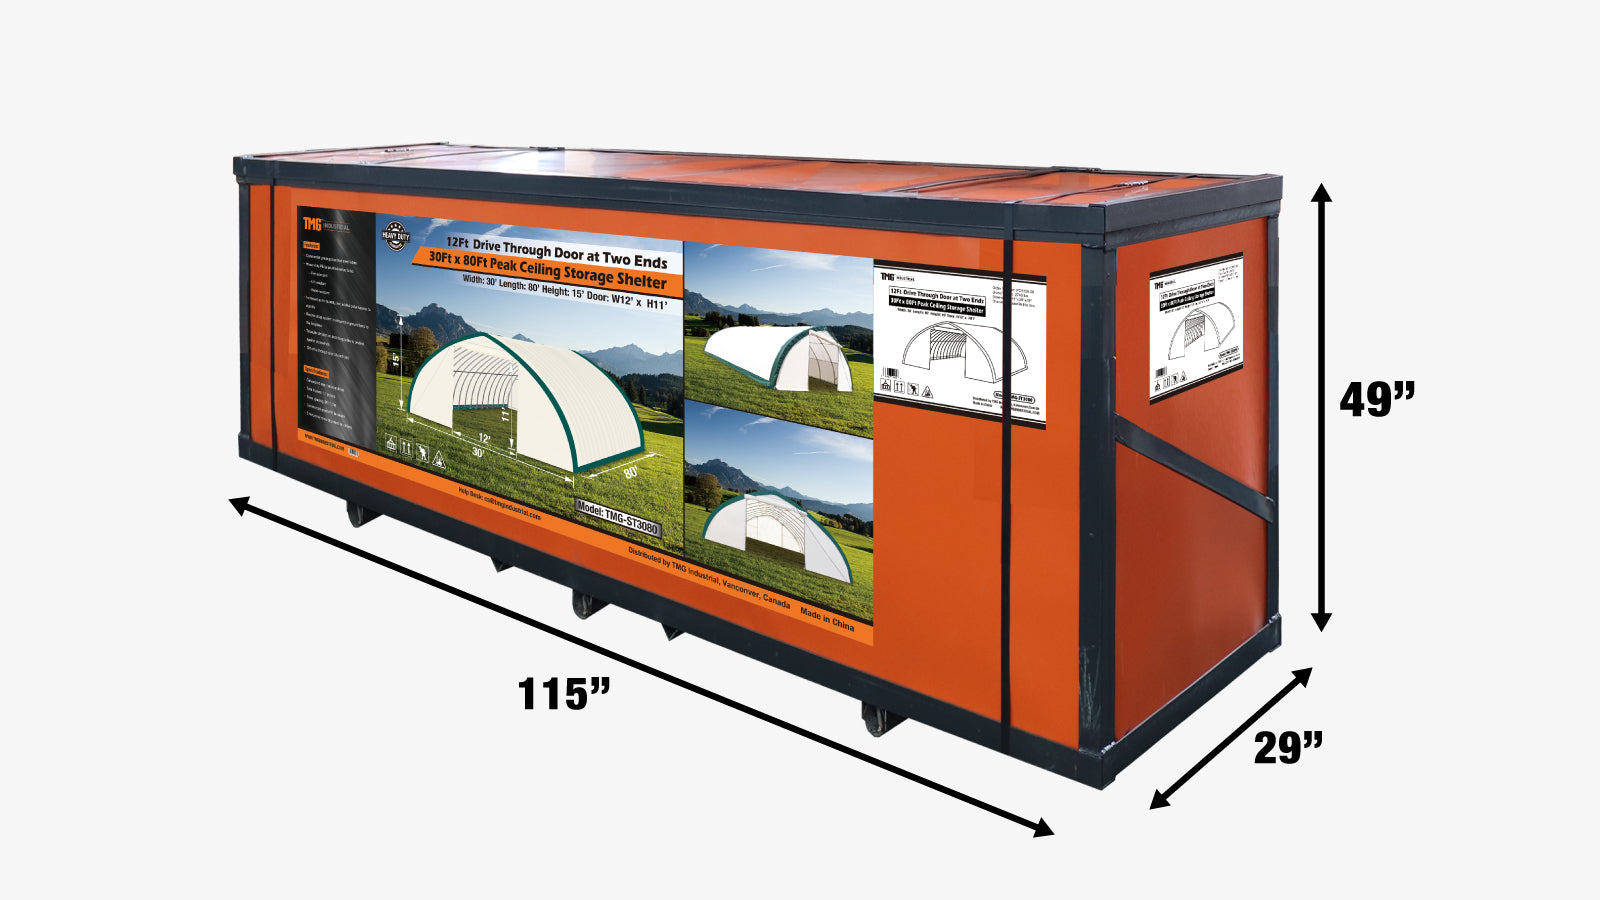 TMG Industrial 30' x 80' Peak Ceiling Storage Shelter with Heavy Duty 11 oz PE Cover & Drive Through Doors, TMG-ST3080E (Previously ST3080)-shipping-info-image